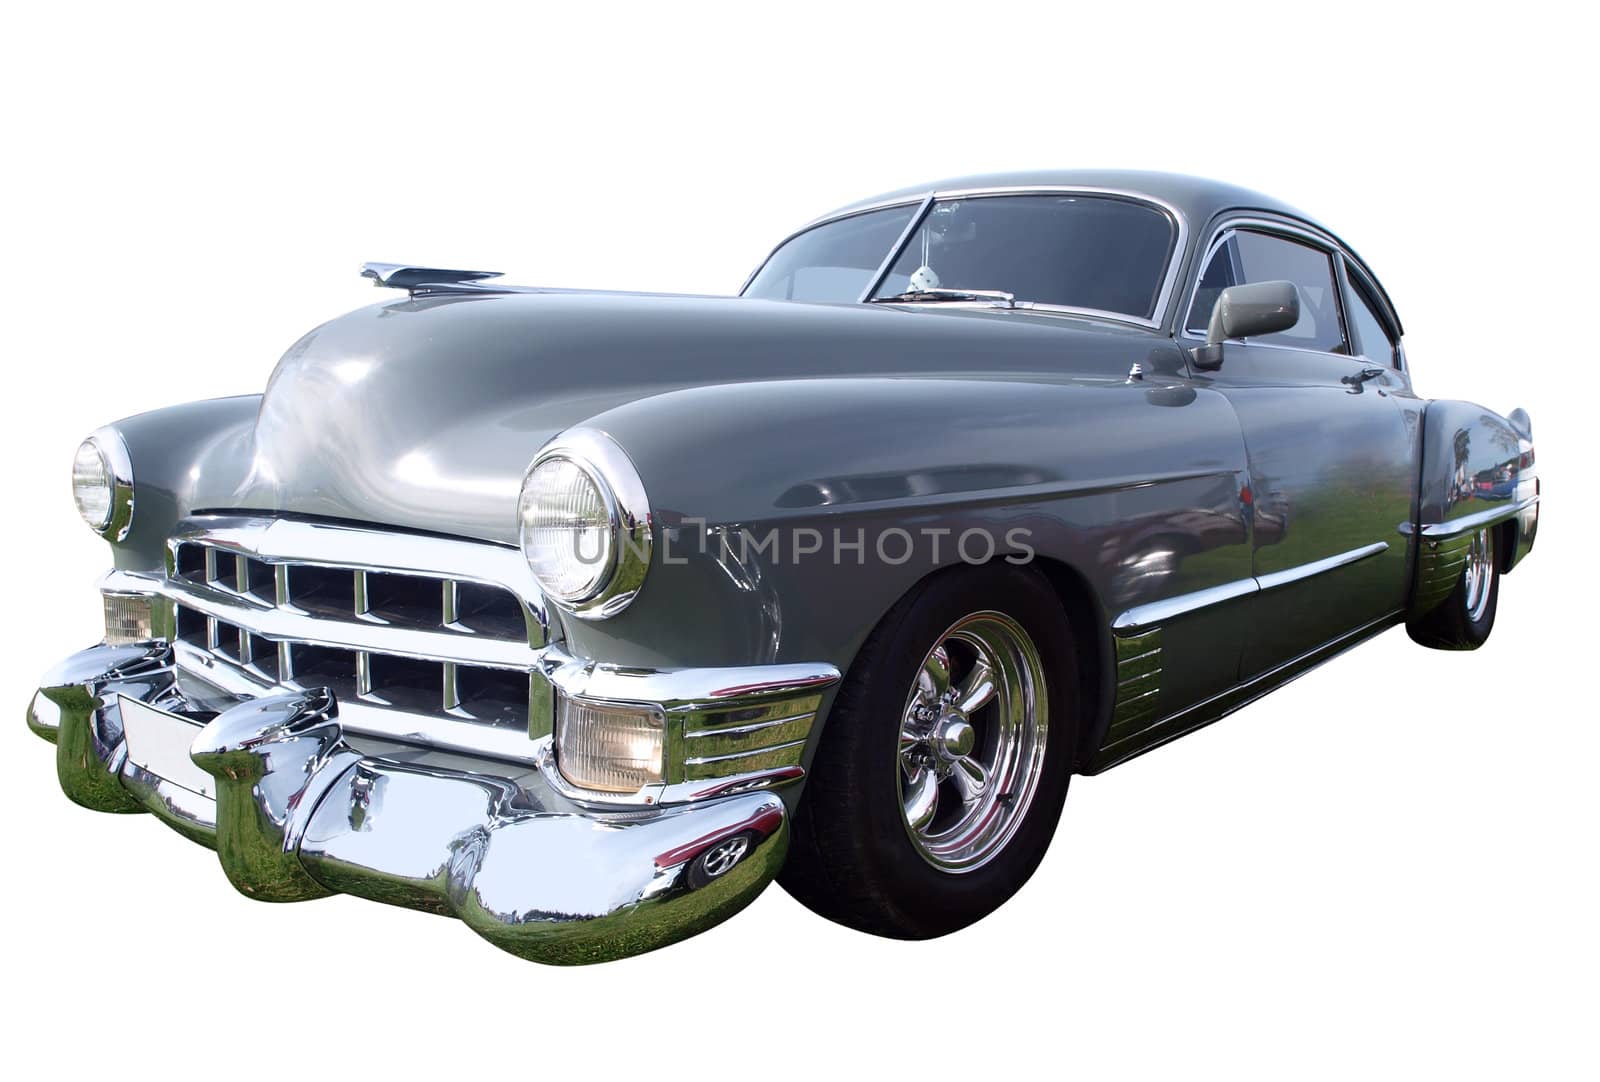 1949 Cadillac Series 62 Sedanette by MargoJH